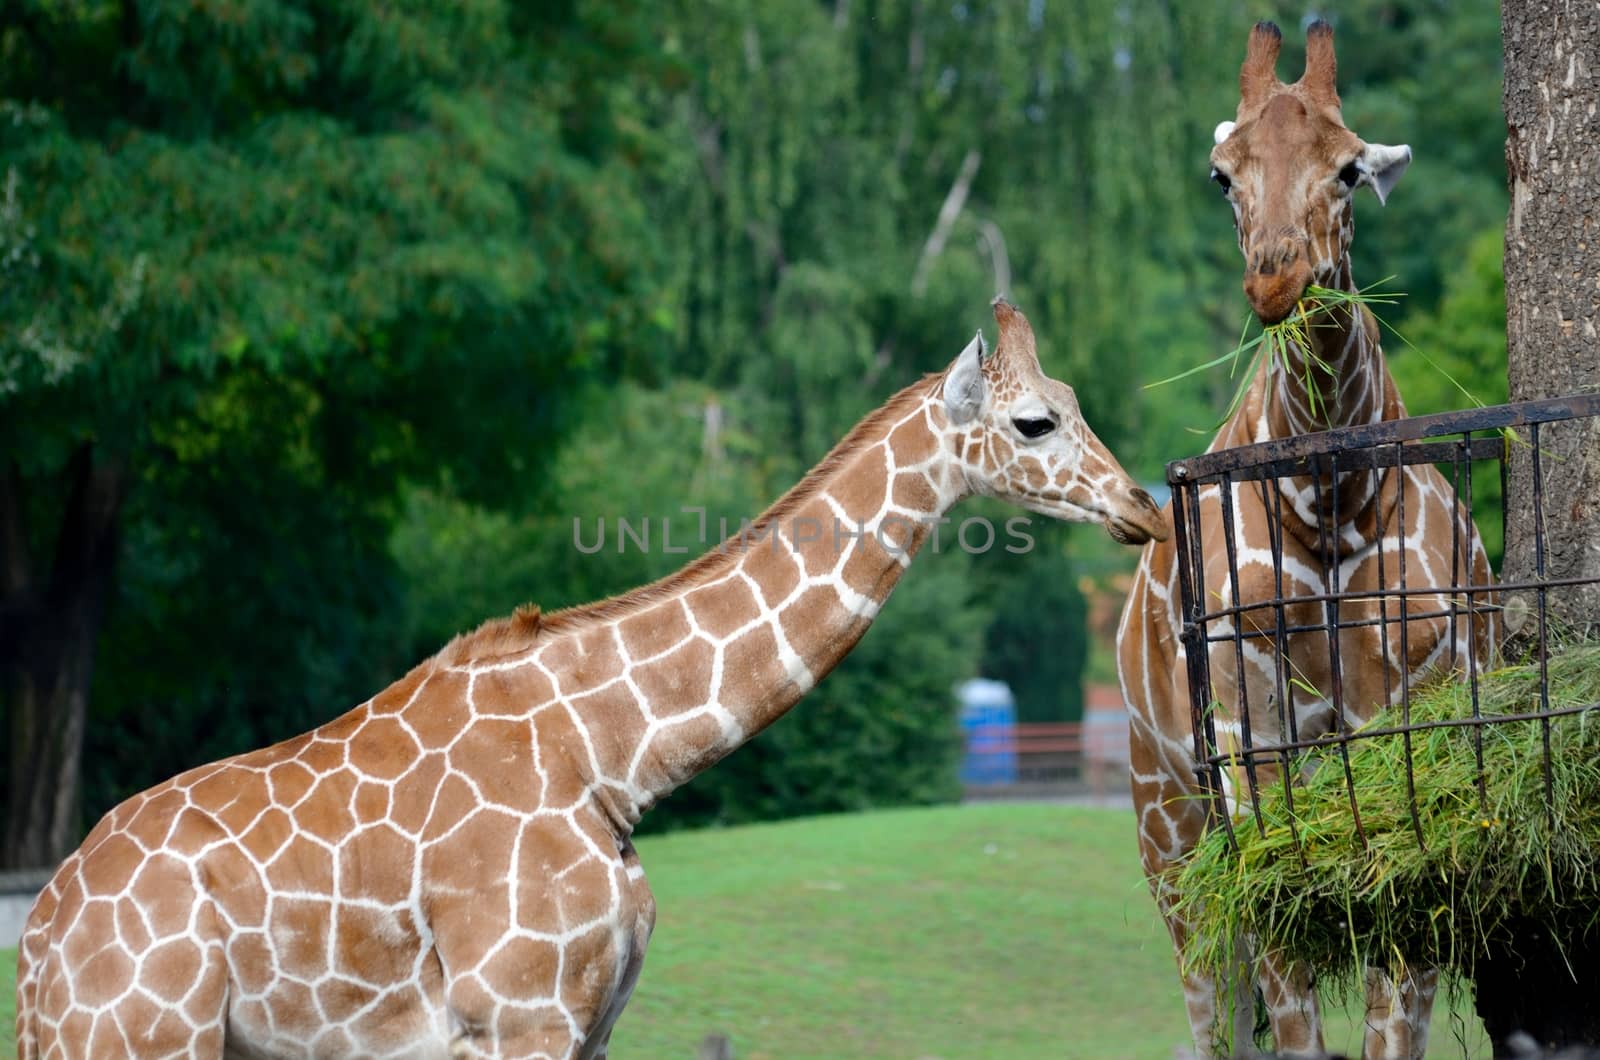 Two giraffes in Wroclaw's ZOO, Poland. Animals eating green grass from special feeder on the tree.